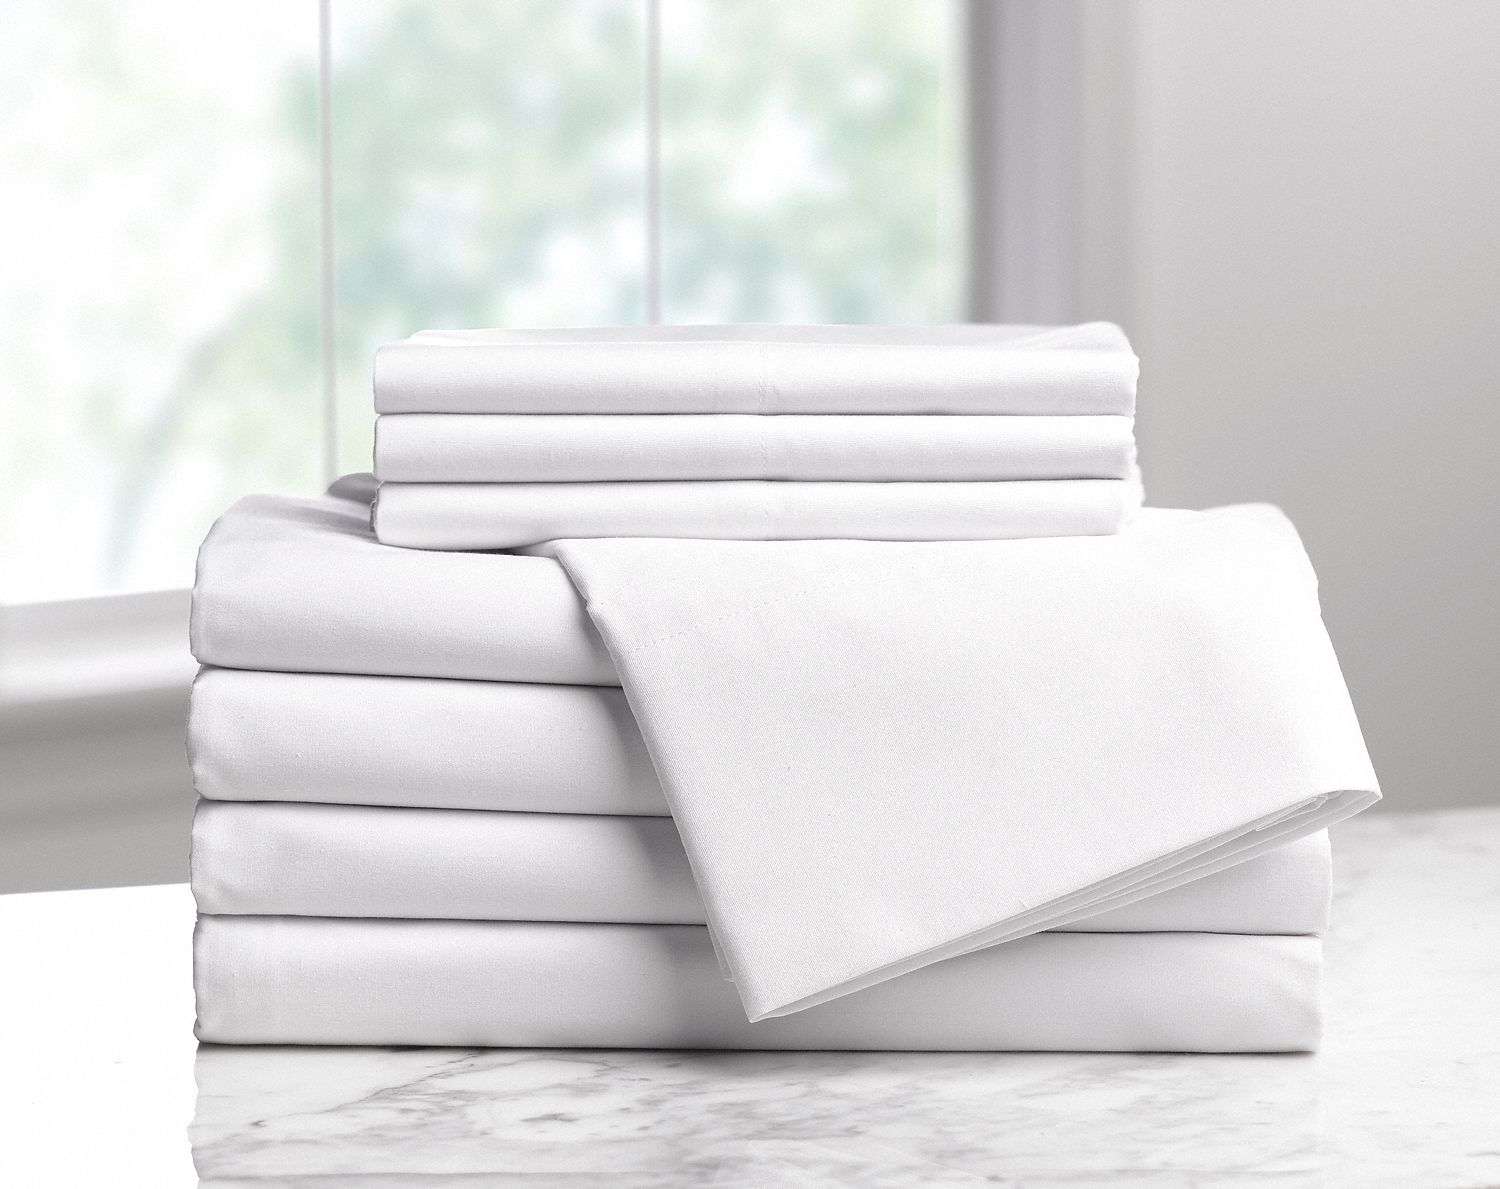 Flat Sheet: Flat, Full, 84 in Wd, 110 in Lg, 60% Cotton/40% Polyester Fabric, T200, 6 PK